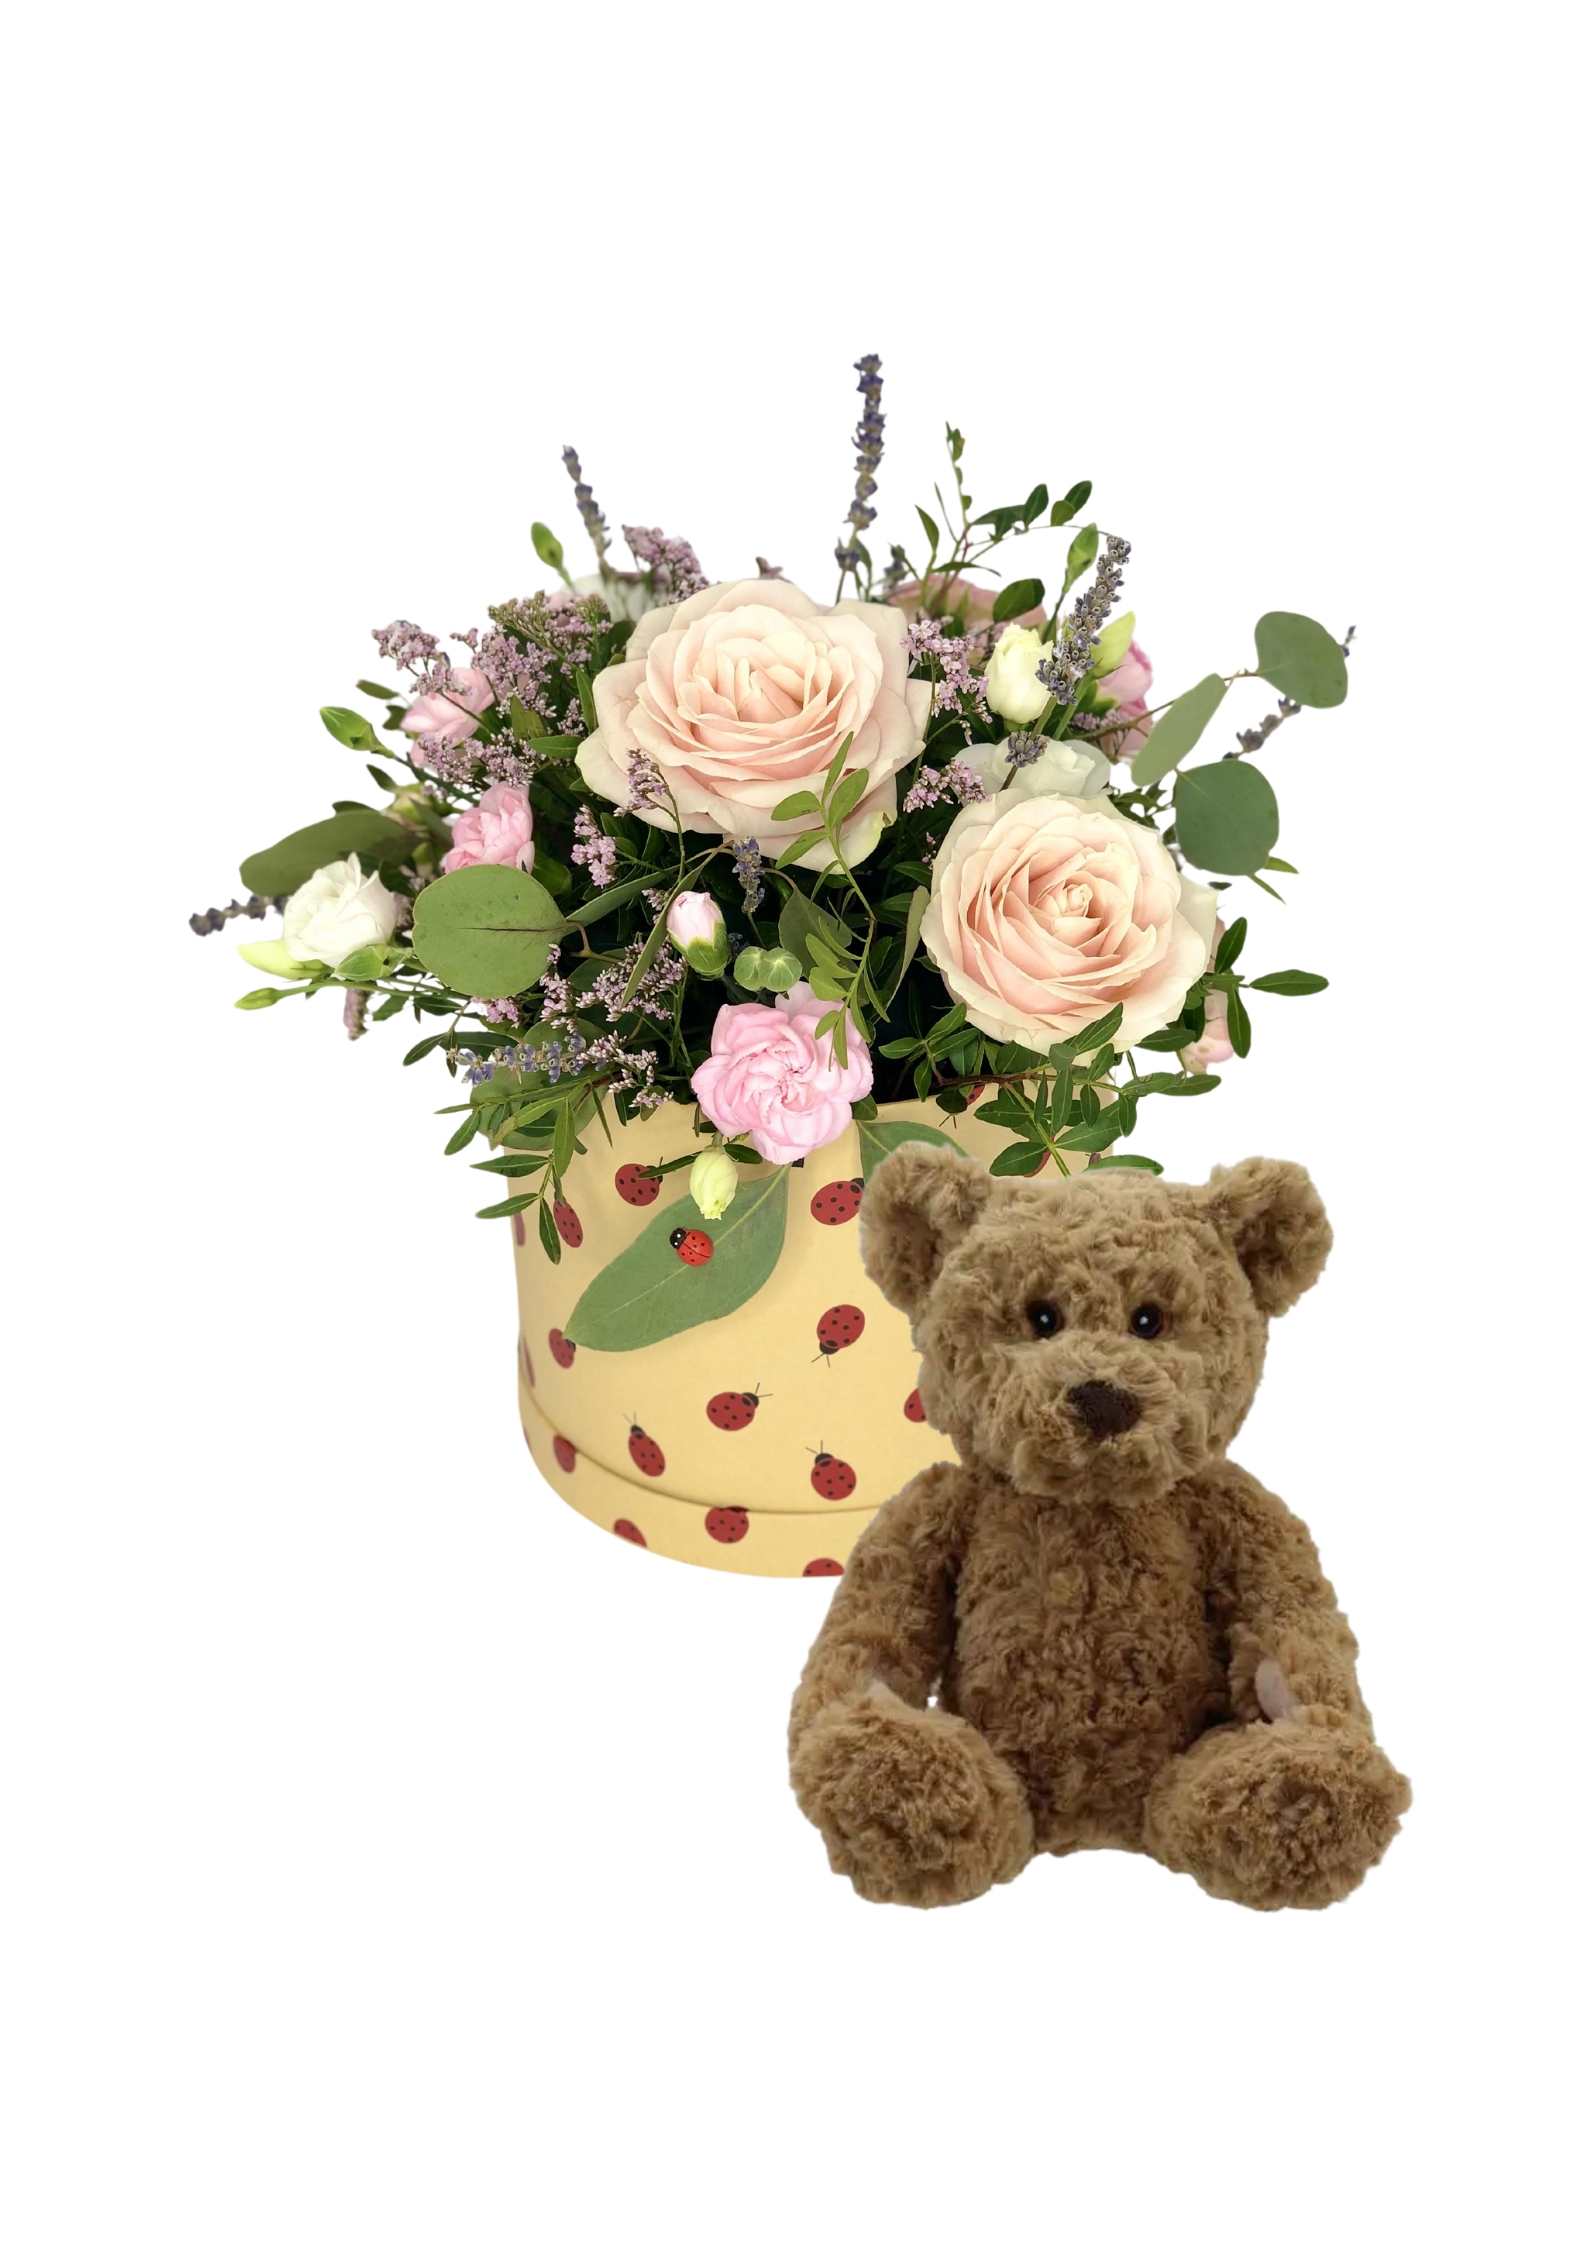 <h2>New Baby Hatbox and Cute Sheep Soft Toy Hand-Delivered</h2>
<br>
<ul>
<li>Approximate Dimensions of hatbox: 20cm x 25cm</li>
<li>Flowers arranged by hand into a hatbox and finished off with a hidden wooden ladybird</li>
<li>To give you the best occasionally we may make substitutes</li>
<li>Our flowers backed by our 7 days freshness guarantee</li>
<li>For delivery area coverage see below</li>
</ul>
<br>
<h2>Flower Delivery Coverage</h2>
<p>Our shop delivers flowers to the following Liverpool postcodes L1 L2 L3 L4 L5 L6 L7 L8 L11 L12 L13 L14 L15 L16 L17 L18 L19 L24 L25 L26 L27 L36 L70 If your order is for an area outside of these we can organise delivery for you through our network of florists. We will ask them to make as close as possible to the image but because of the difference in stock and sundry items it may not be exact.</p>
<br>
<h2>Hatbox of Flowers | Flowers Hand Delivered</h2>
<p>Make a statement with a unique hatbox of pink and white flowers. A new baby girl puts everyone in a celebratory mood so we have designed this gift to be perfect for the occasion. Plus it comes complete with a cute soft sheep.</p>
<p>This Sheep soft toy makes a cute addition to your hatbox and is sure to be loved by young and old. This plush baby-safe Sheep is 6 inches high and is the perfect finishing touch.</p>
<p>Soft toys are a lovely addition to a floral order, especially where the flowers are going to new parents and you want to give something to the new baby and any siblings.</p>
<p>We have carefully selected this cute cuddly selection of plush toys to give you a range of options. All have stitched eyes and noses making them baby safe.</p>
<p>The hatbox features two pink large-headed roses, 1 pink spray rose, 3 white freesia, 1 pink waxflower, 10 dried lavender and pistache. Presented in a soft nude 'keepsake' hatbox.</p>
<br>
<h2>Eco-Friendly Liverpool Florists</h2>
<p>As florists we feel very close earth and want to protect it. Plastic waste is a huge problem in the florist industry so we made the decision to make our packaging eco-friendly.</p>
<p>To achieve this we worked with our packaging supplier to remove the lamination off our boxes and wrap the tops in an Eco Flowerwrap which means it easily compostable or can be fully recycled.</p>
<p>Once you have finished enjoying your flowers from us they will go back into growing more flowers! Only a small amount of plastic is used as a water bubble and this is biodegradable.</p>
<p>Even the sachet of flower food included with your bouquet is compostable.</p>
<p>All our bouquets have small wooden ladybird hidden amongst them so do not forget to spot the ladybird and post a picture on our social media pages to enter our rolling competition.</p>
<br>
<h2>Flowers Guaranteed for 7 Days</h2>
<p>Our 7-day freshness guarantee should give you confidence that we will only send out good quality flowers.</p>
<p>Leave it in our hands we will create a marvellous bouquet which will not only look good on arrival but will continue to delight as the flowers bloom.</p>
<br>
<h2>Liverpool Flower Delivery</h2>
<p>We are open 7 days a week and offer advanced booking flower delivery same-day flower delivery 3-hour flower delivery. Guaranteed AM PM or Evening Flower Delivery and also offer Sunday Flower Delivery.</p>
<p>Our florists deliver in Liverpool and can provide flowers for you in Liverpool Merseyside. And through our network of florists can organise flower deliveries for you nationwide.</p>
<br>
<h2>The Best Florist in Liverpool your local Liverpool Flower Shop</h2>
<p>Come to Booker Flowers and Gifts Liverpool for your beautiful flowers and plants. For that bit of extra luxury we also offer a lovely range of finishing touches such as wines champagne locally crafted Gin and Rum Vases Scented Candles and Chocolates that can be delivered with your flowers.</p>
<p>To see the full range see our extras section.</p>
<p>You can trust Booker Flowers and Gifts of delivery the very best for you.</p>
<p><br /><br /></p>
<p><em>5 Star review on Yell.com</em></p>
<br>
<p><em>Thank you Gemma for your fabulous service. The flowers are of the highest quality and delivered with a warm smile. My sister was delighted. Ordering was simple and the communications were top-notch. I will definitely use your services again.</em></p>